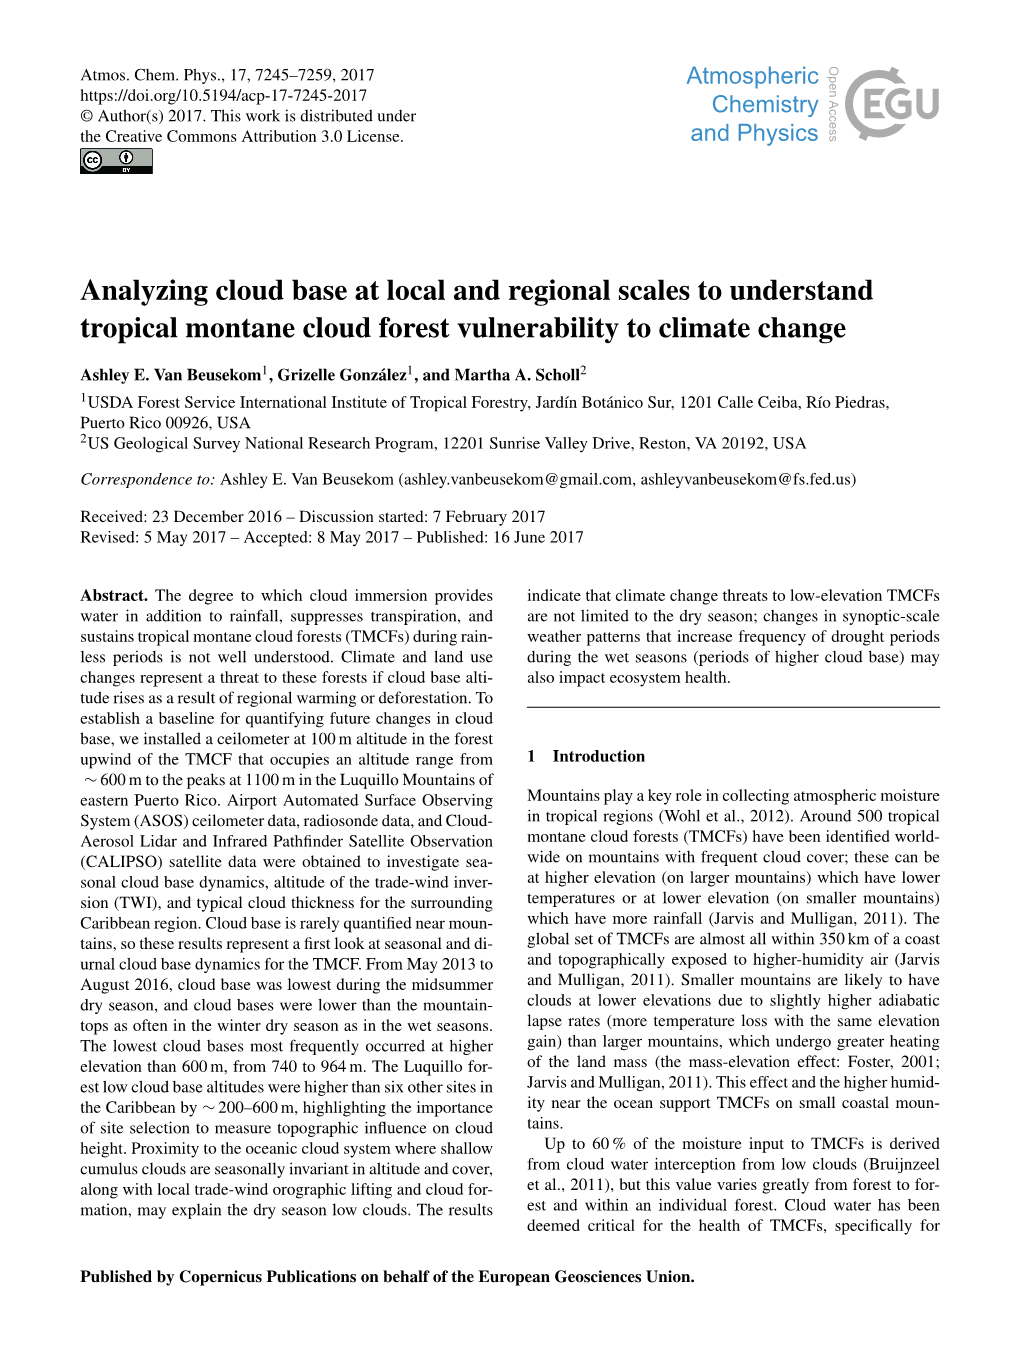 Analyzing Cloud Base at Local and Regional Scales to Understand Tropical Montane Cloud Forest Vulnerability to Climate Change